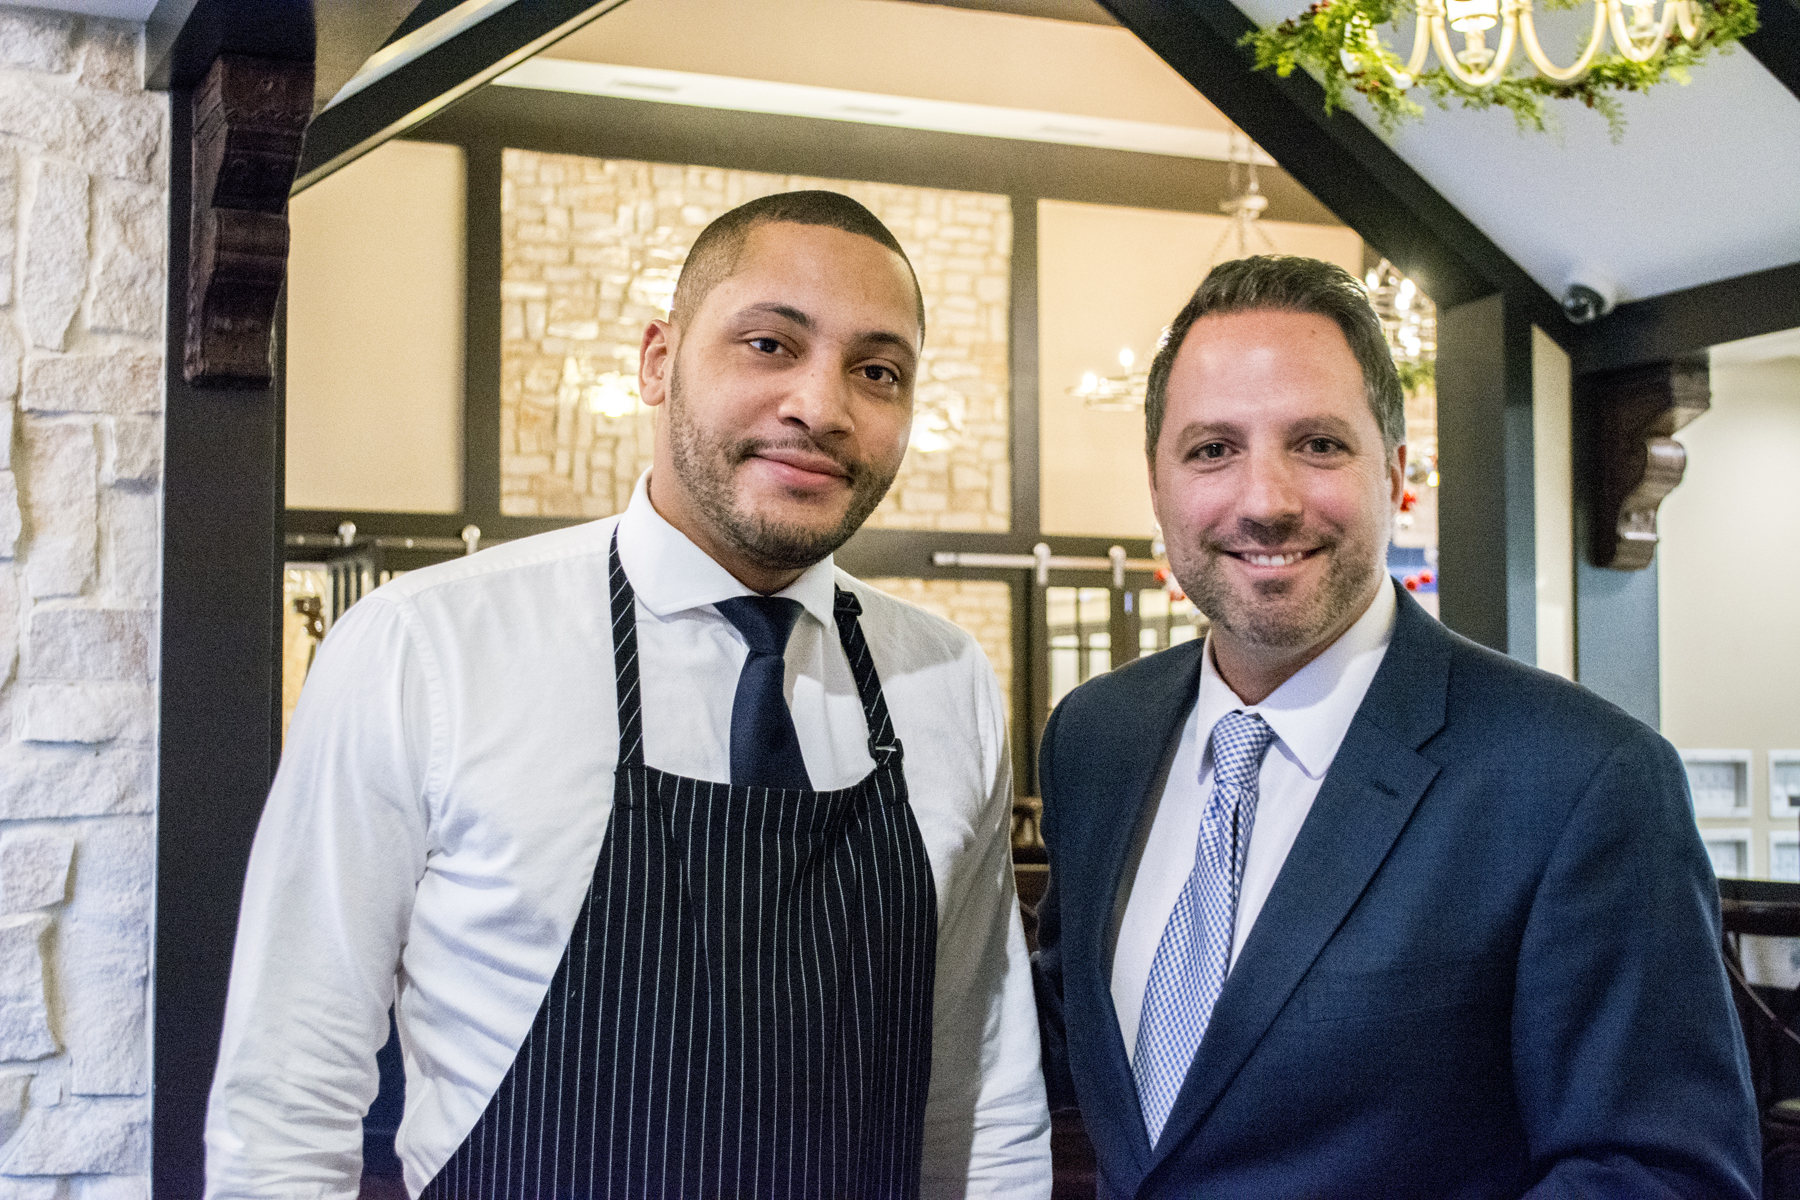   Matteo’s Floor Manager Vincent Lorusso, right, exemplifies the friendly and professional service at the recently re-opened Italian restaurant   Long Islander News photos/Barbara Fiore     &nbsp;   